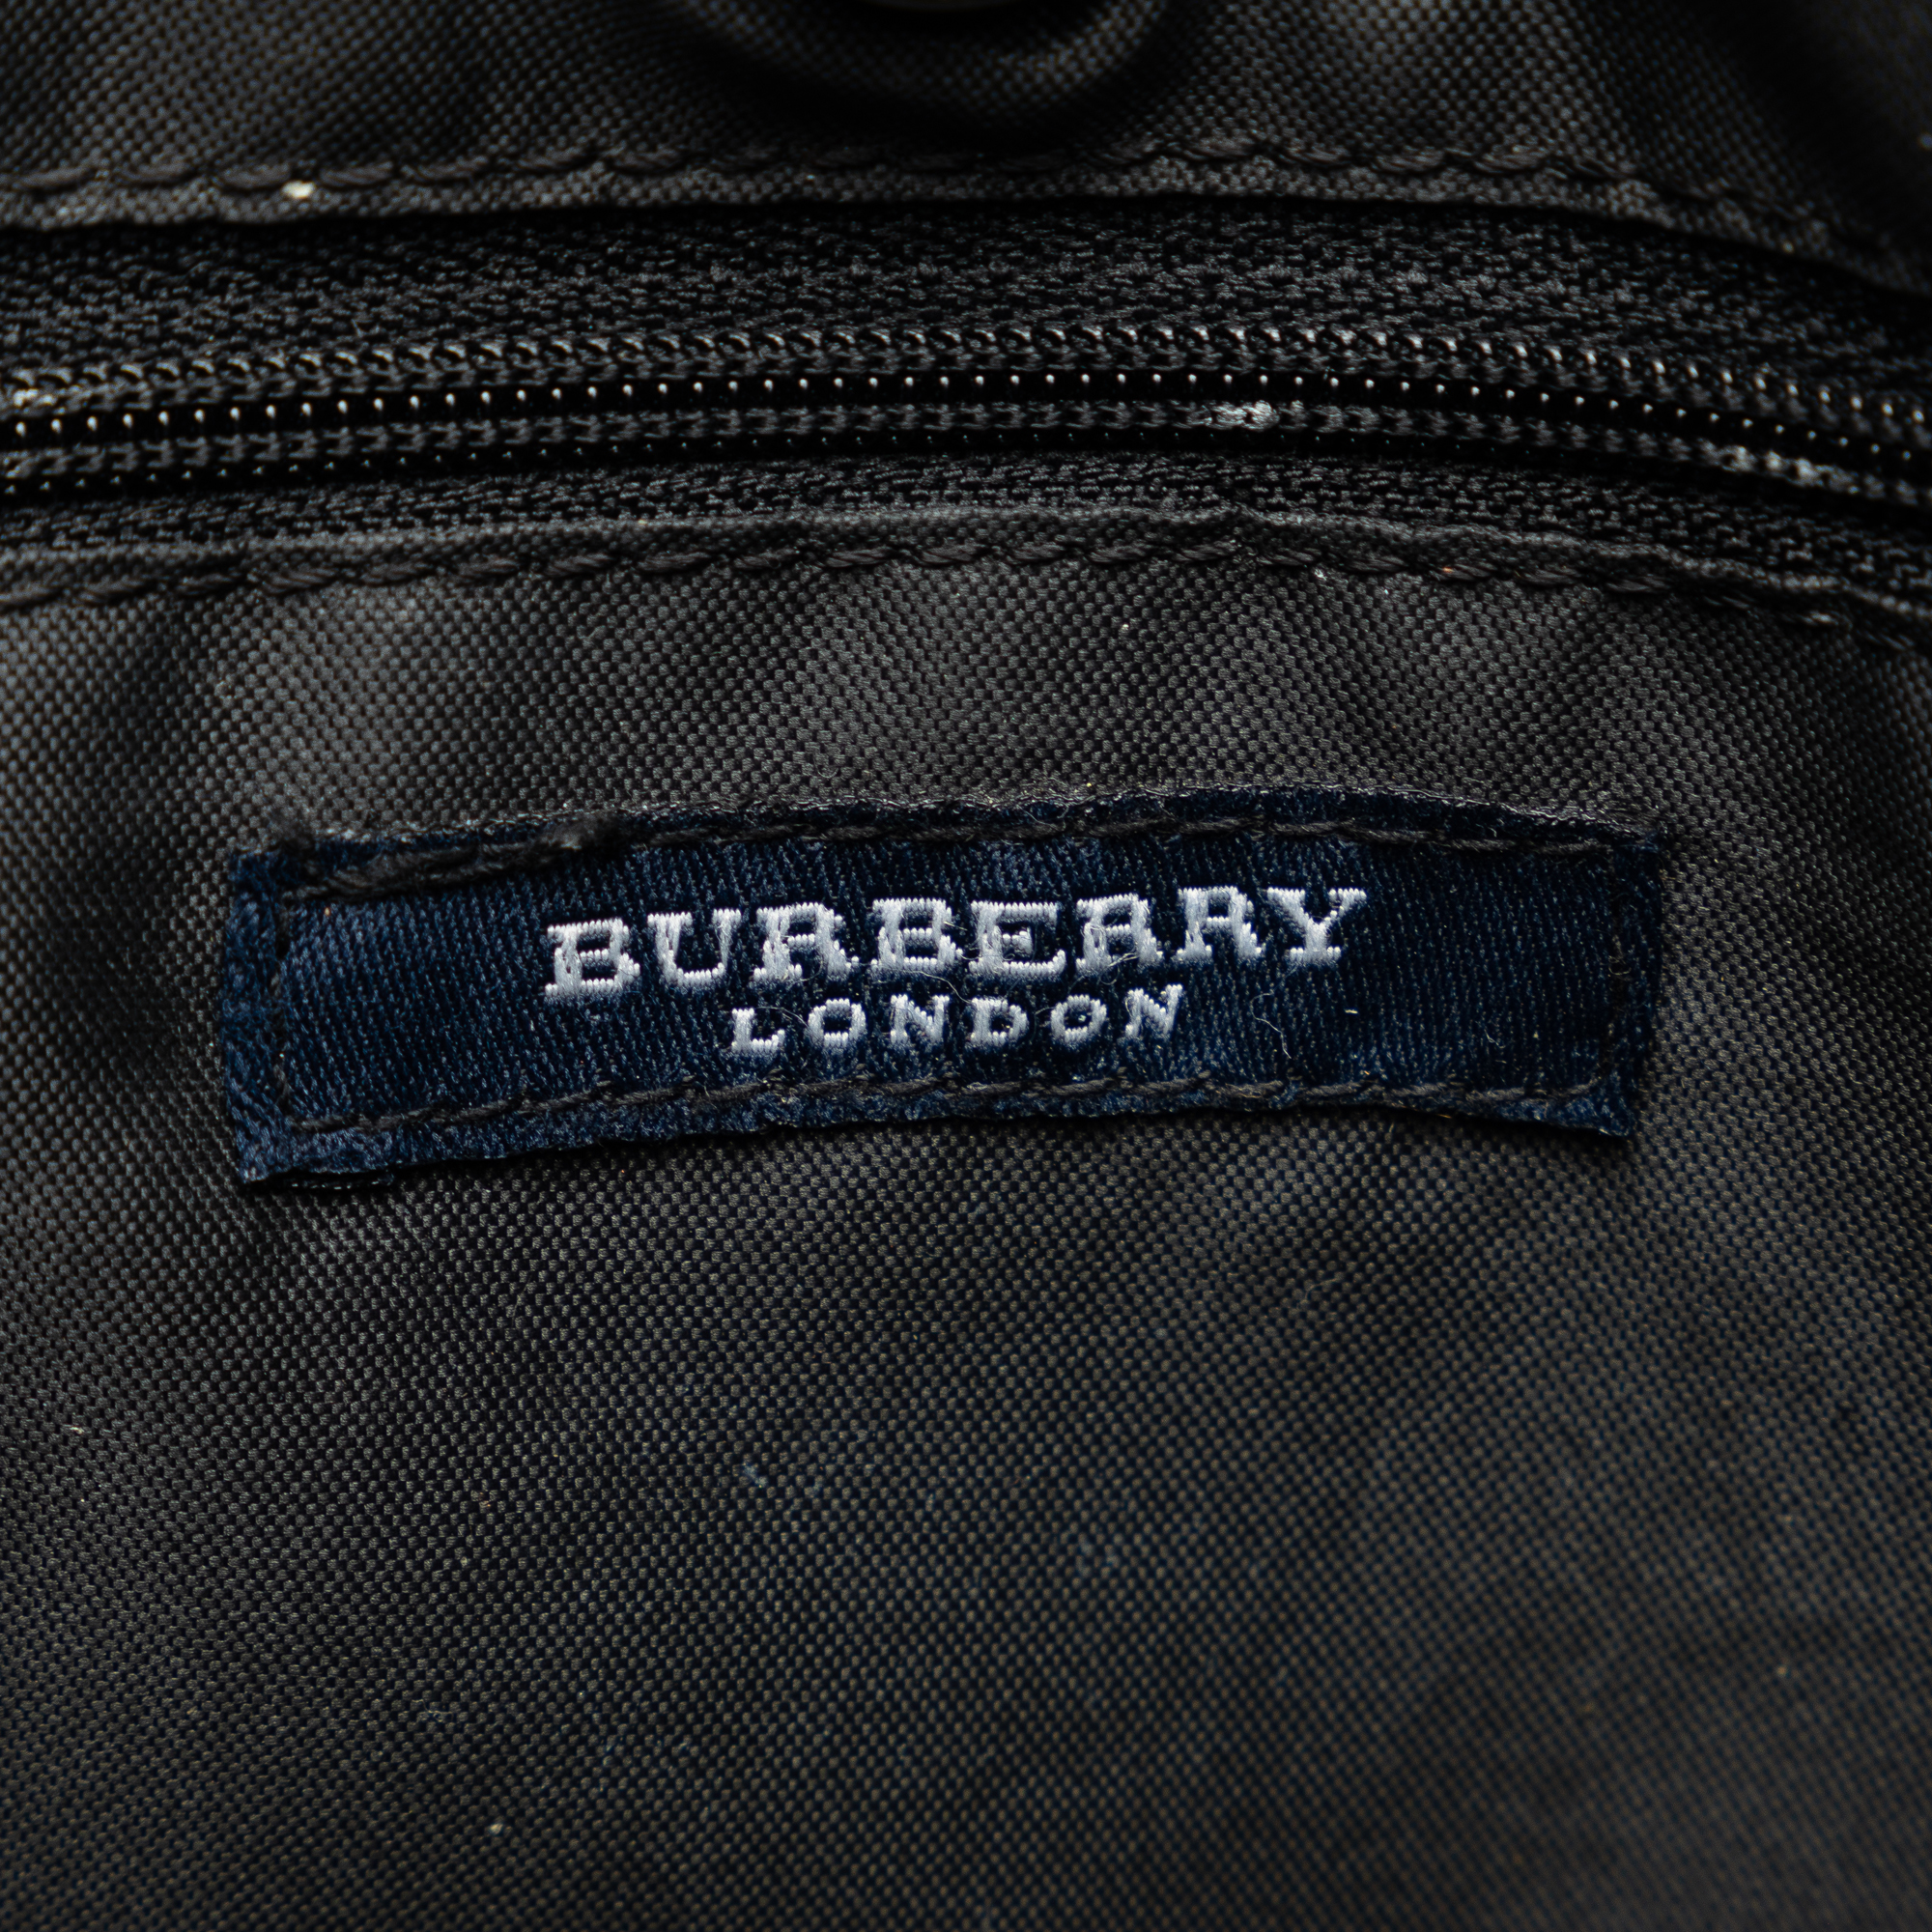 Burberry House Check Tote - Image 6 of 10